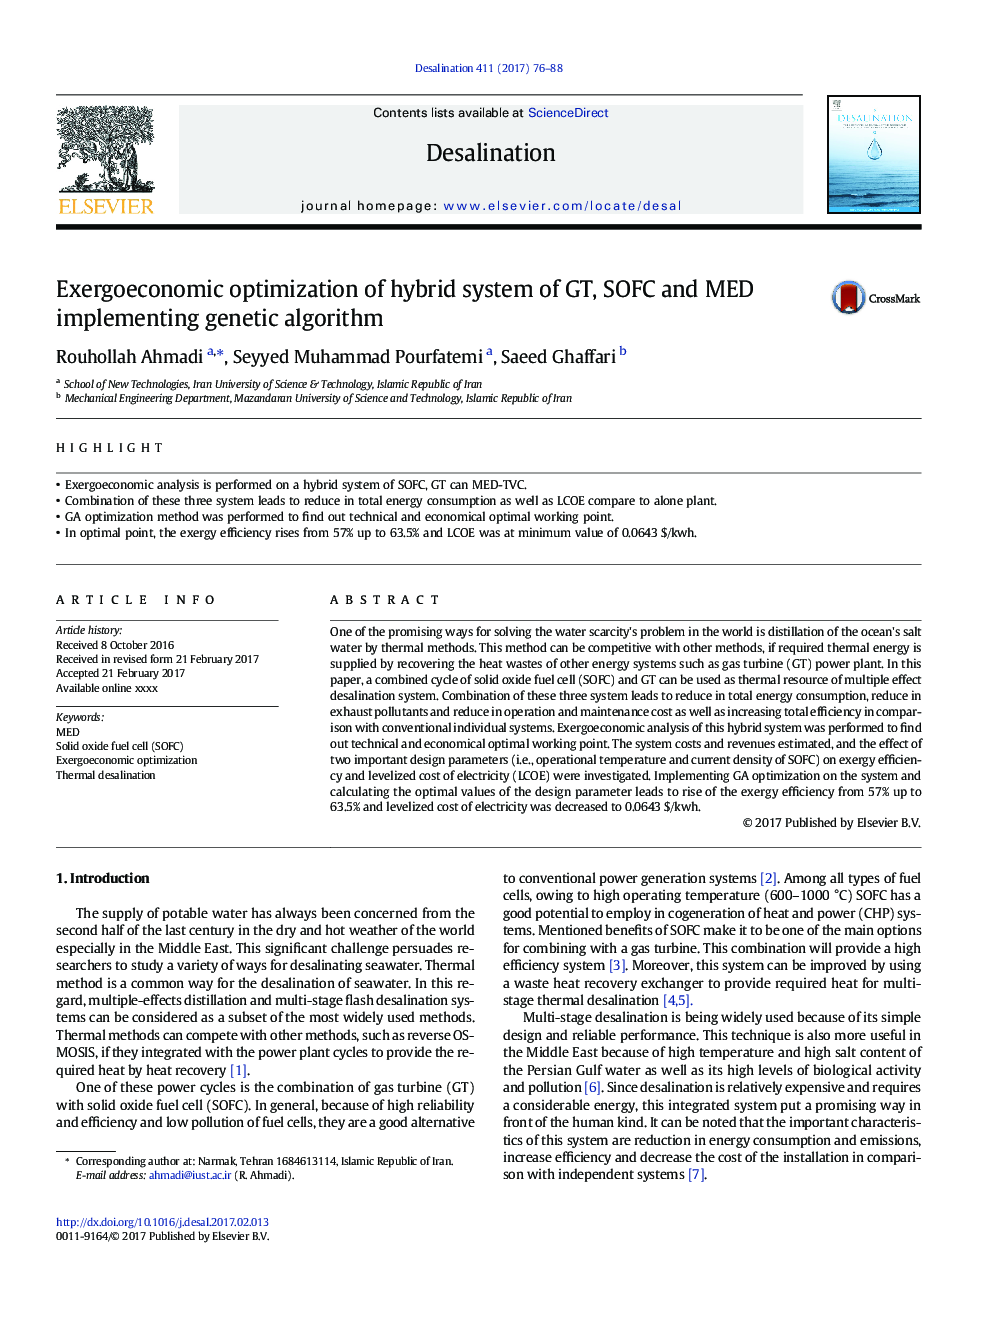 Exergoeconomic optimization of hybrid system of GT, SOFC and MED implementing genetic algorithm